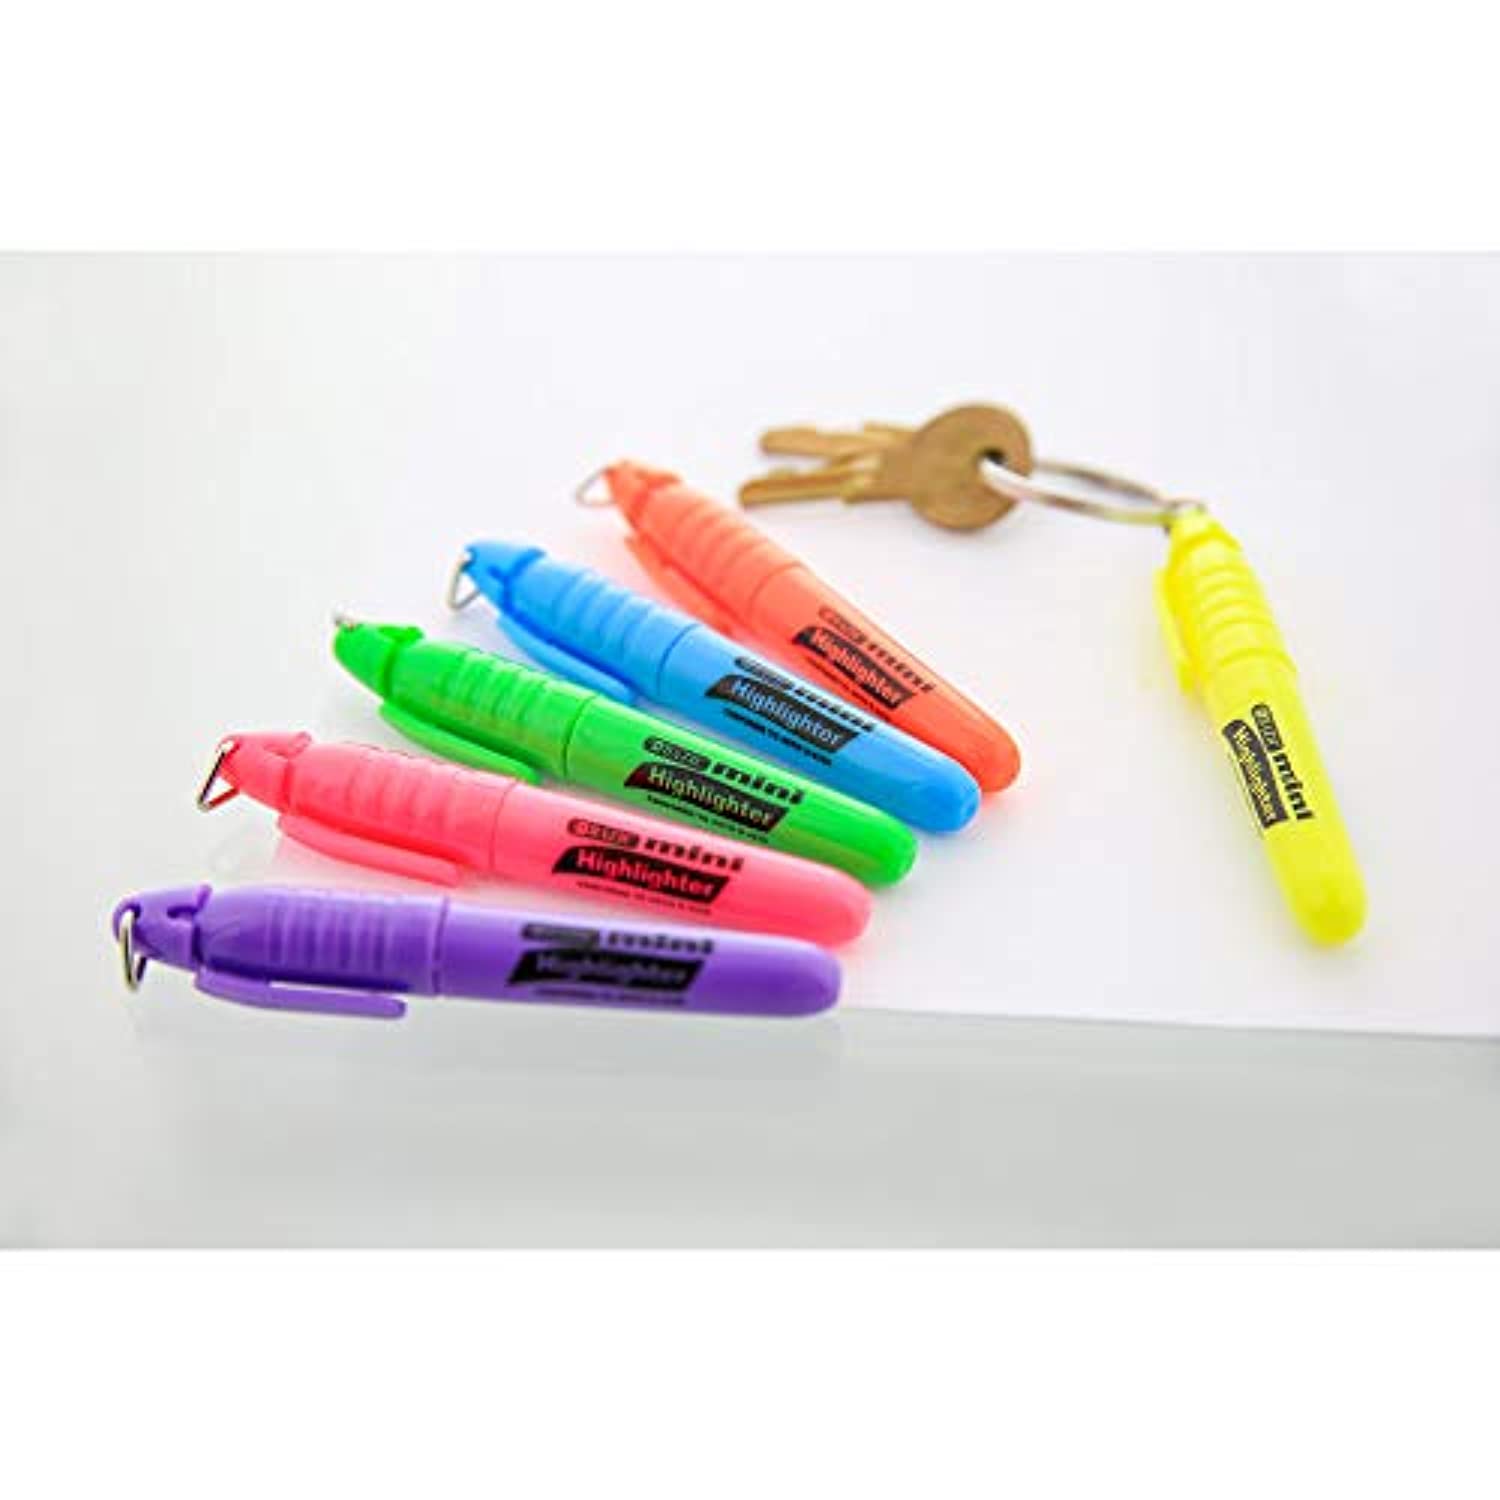 Mini Fluorescent Highlighter w/Cap Clip, Chisel Tip Neon Unscented Quick Dry (4/Pack)